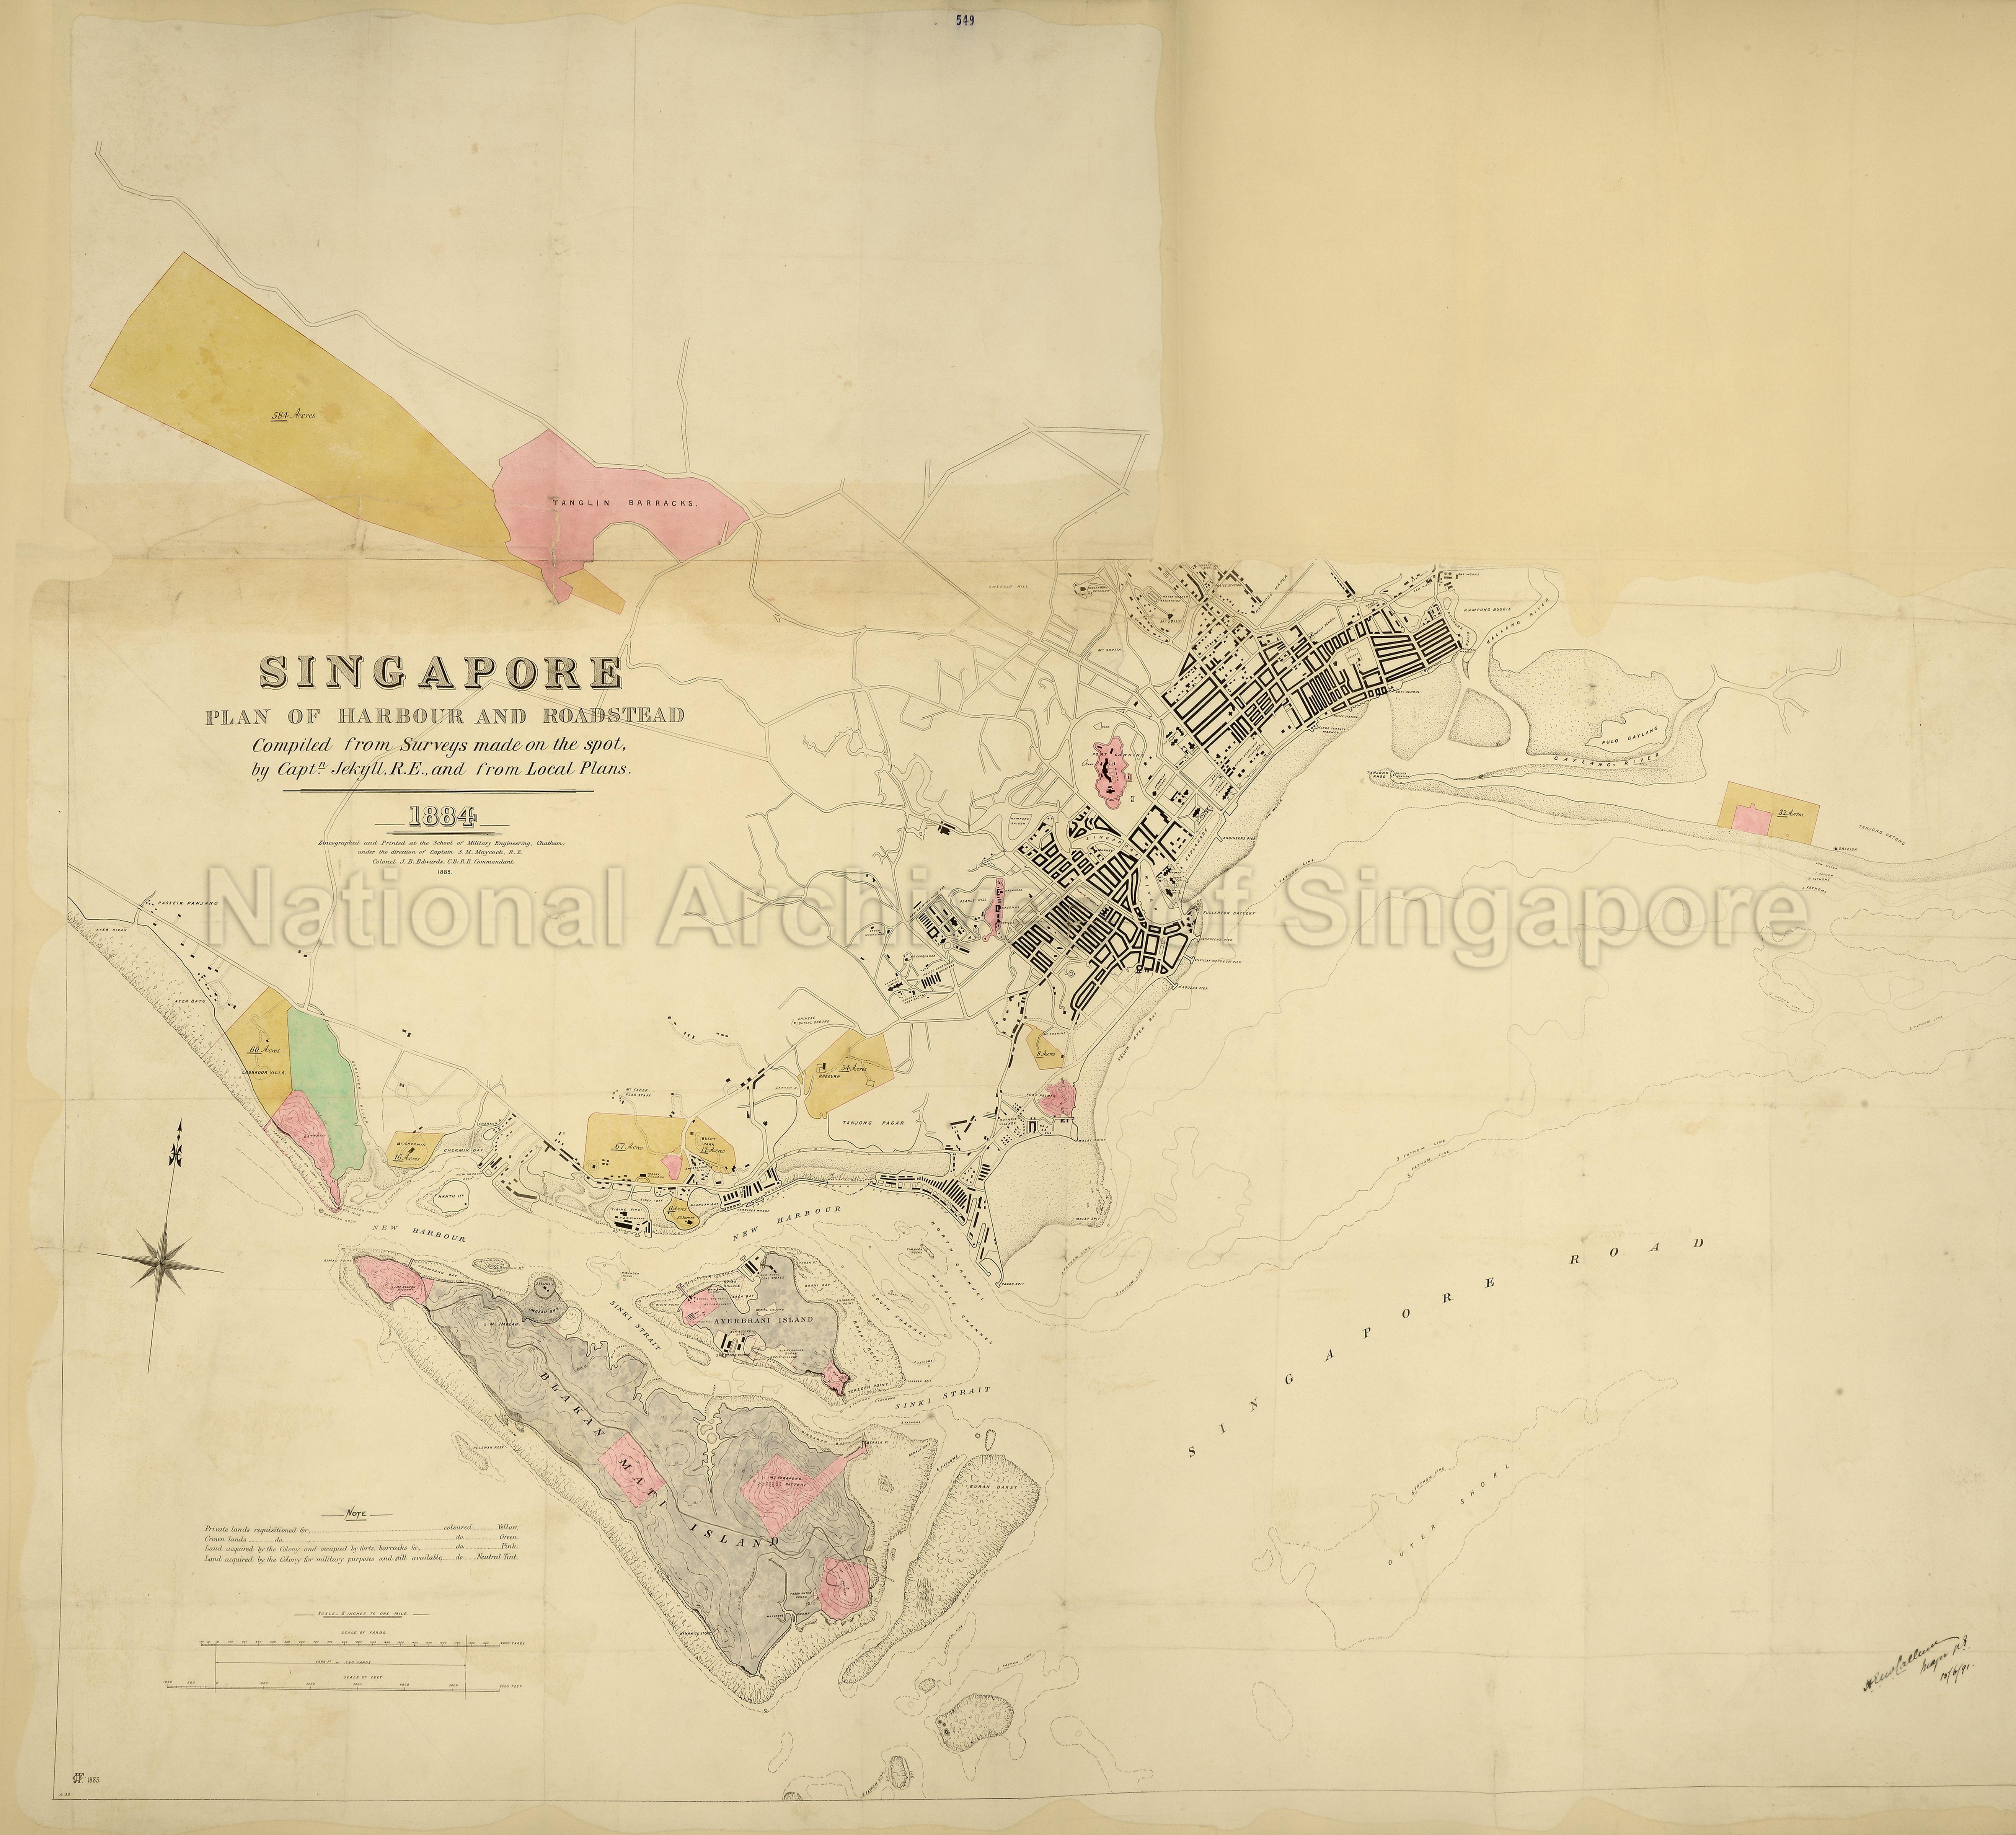 Singapore. Plan of the Harbour and Roadstead